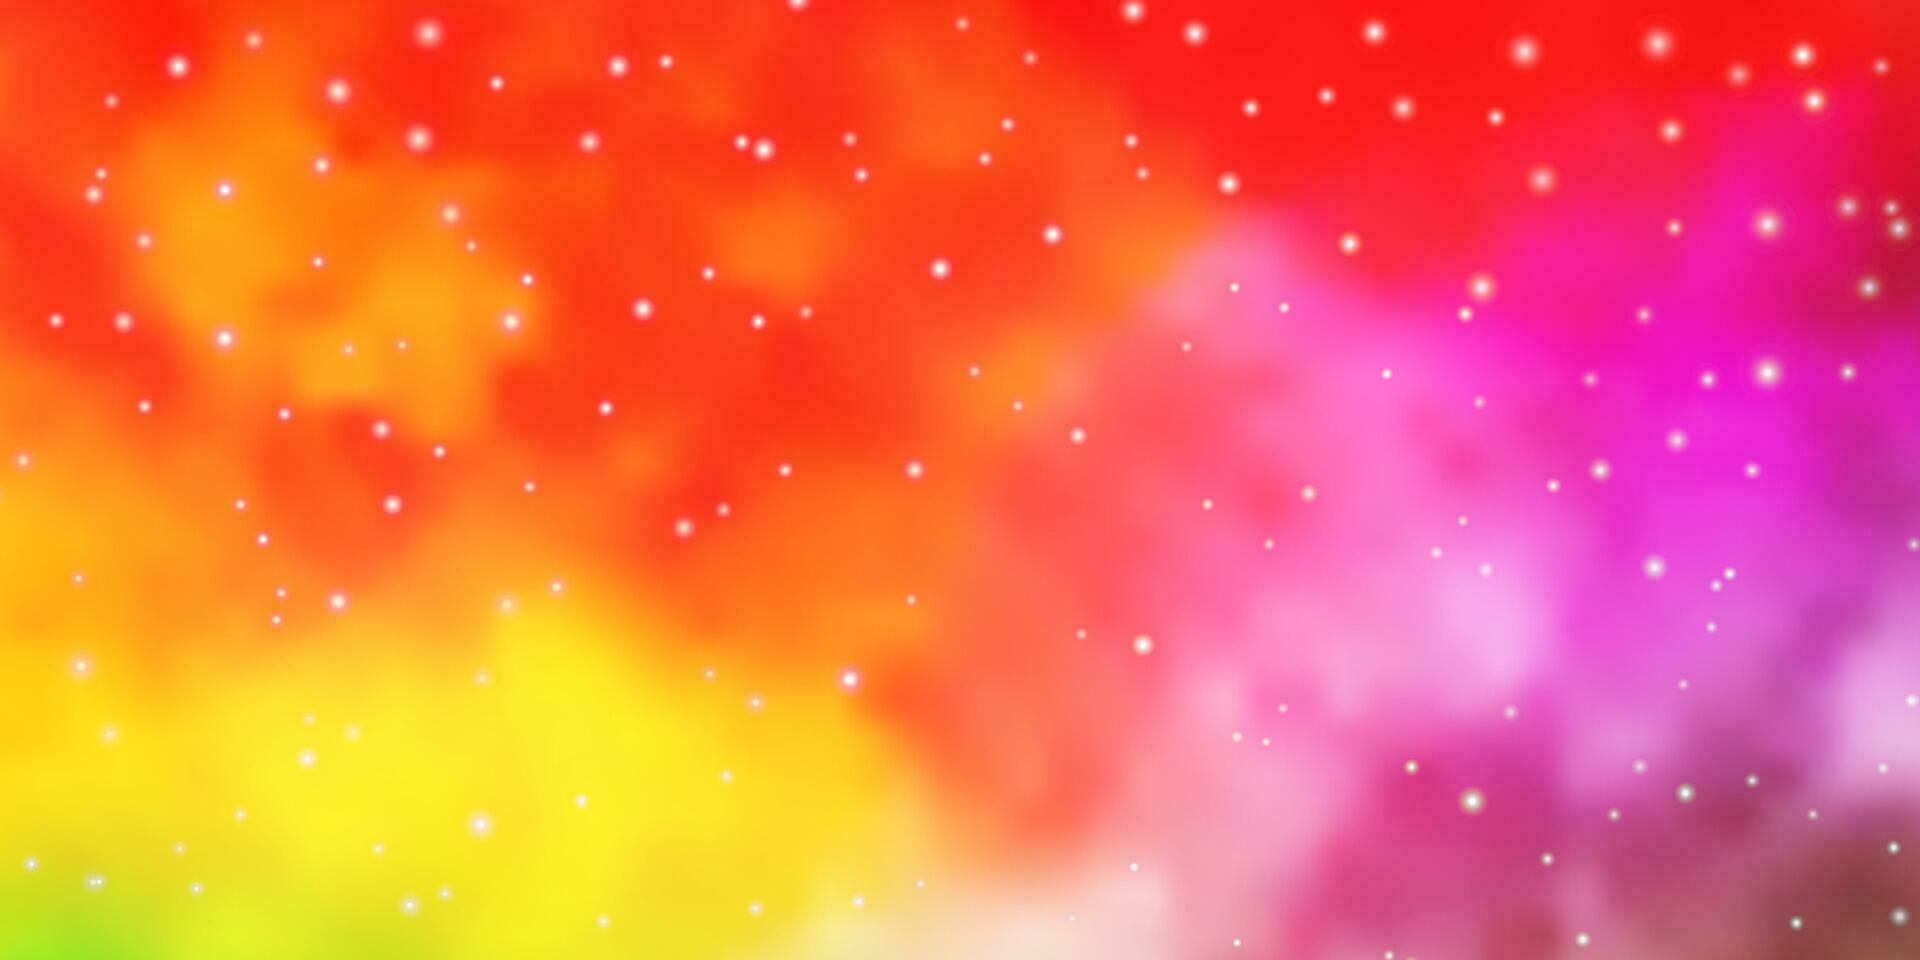 Light Multicolor vector pattern with abstract stars.